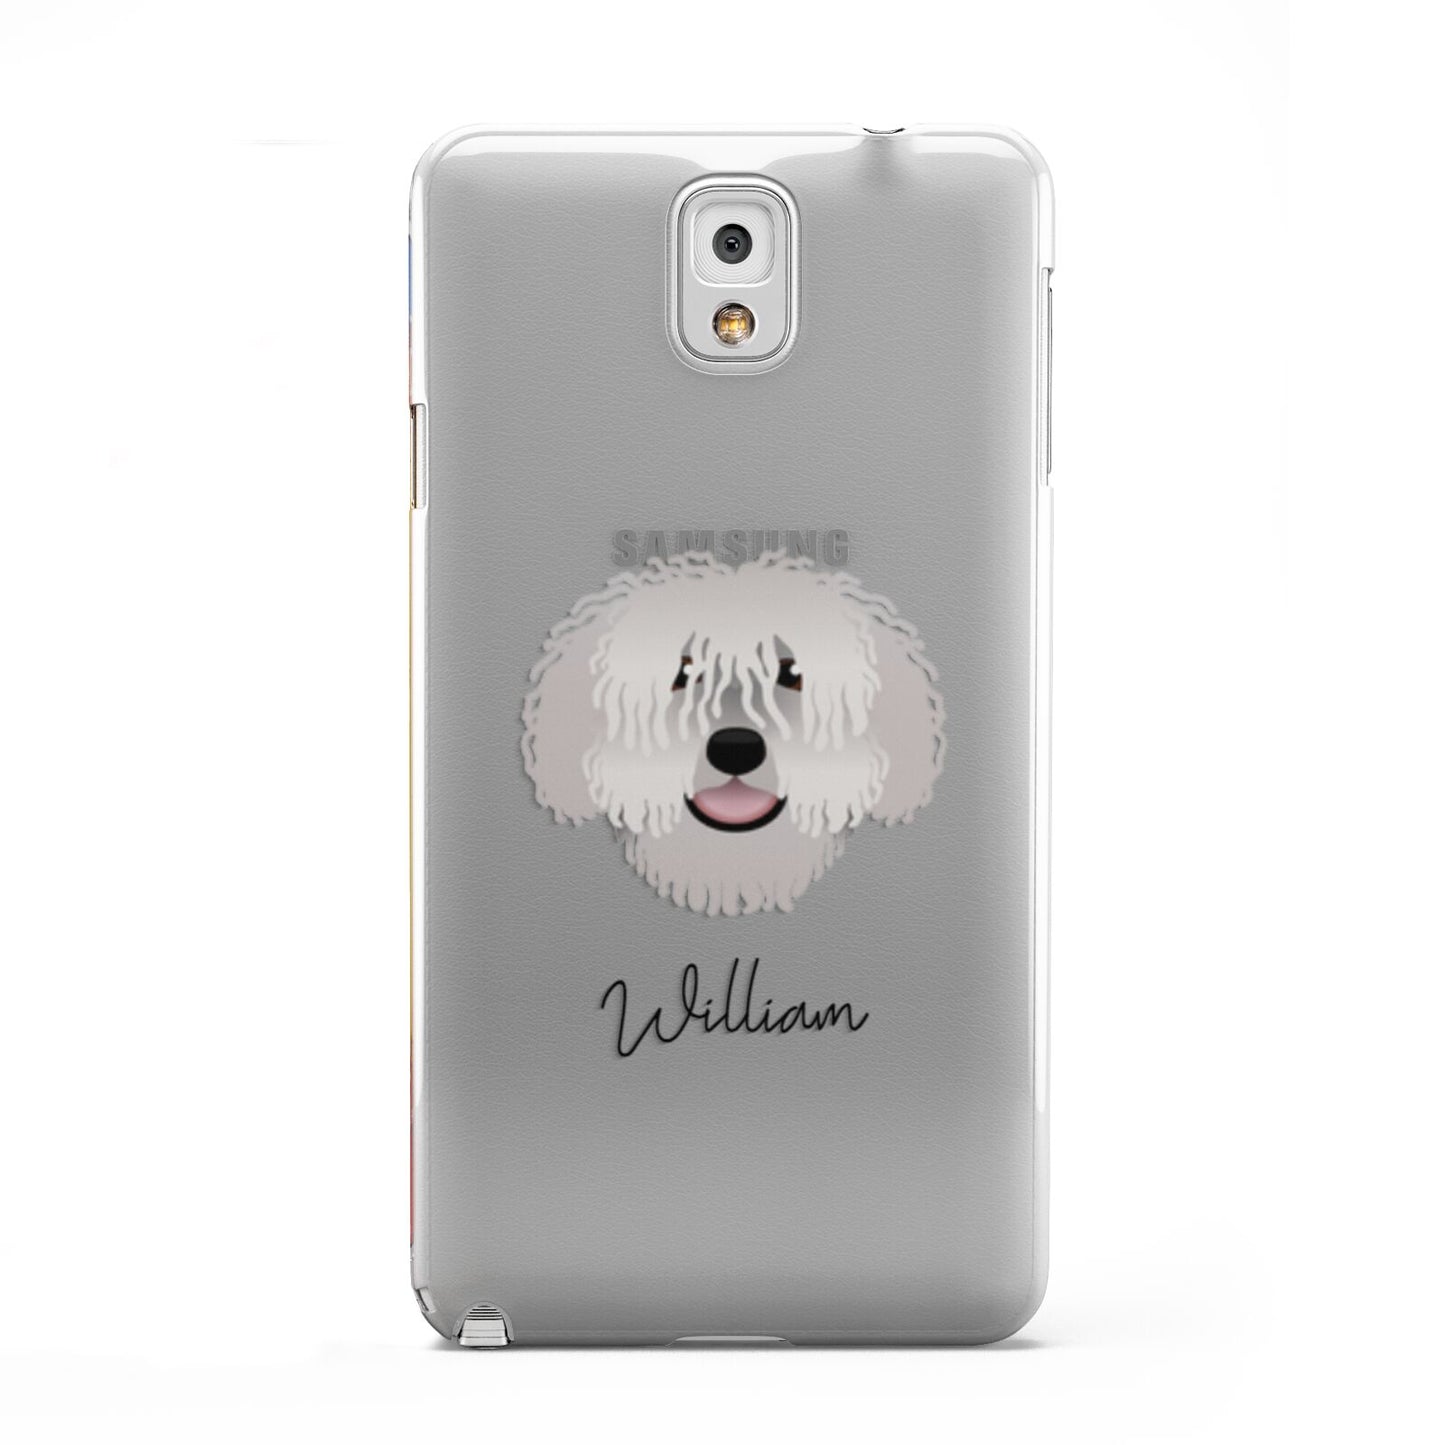 Spanish Water Dog Personalised Samsung Galaxy Note 3 Case